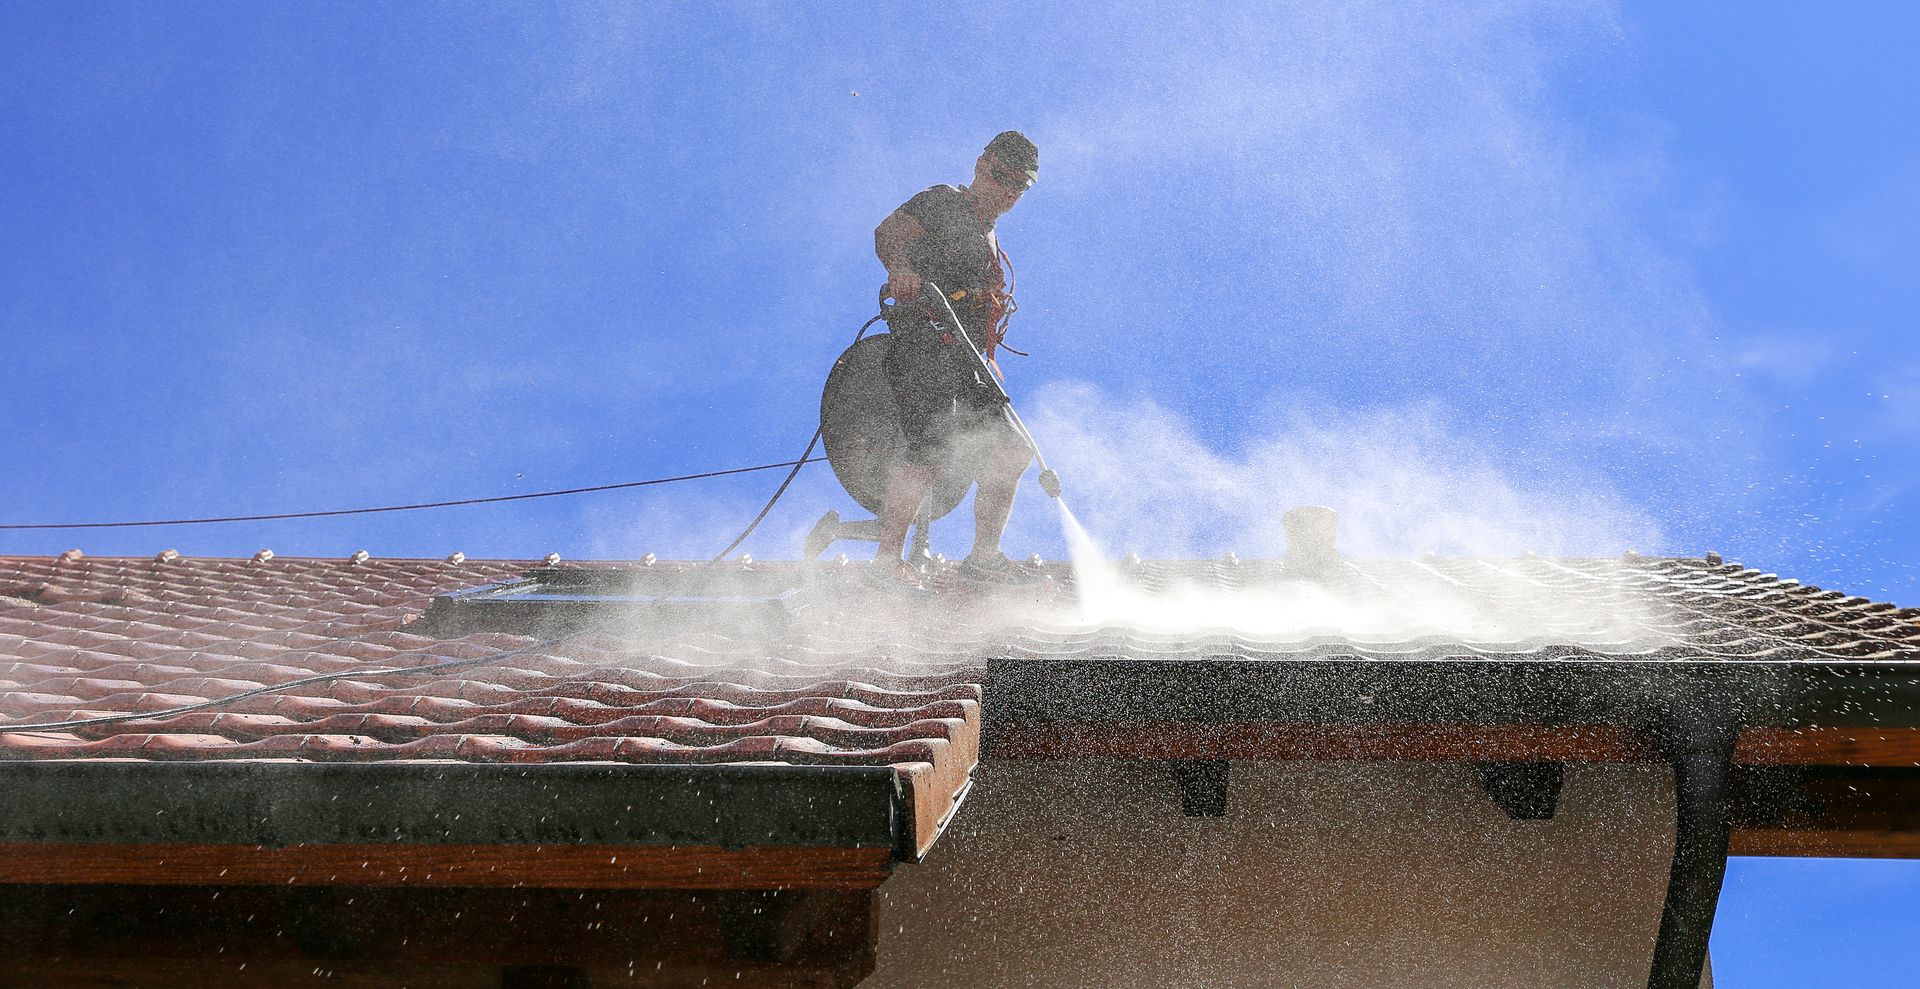 A man is cleaning the roof of a building with a soft pressure washer.